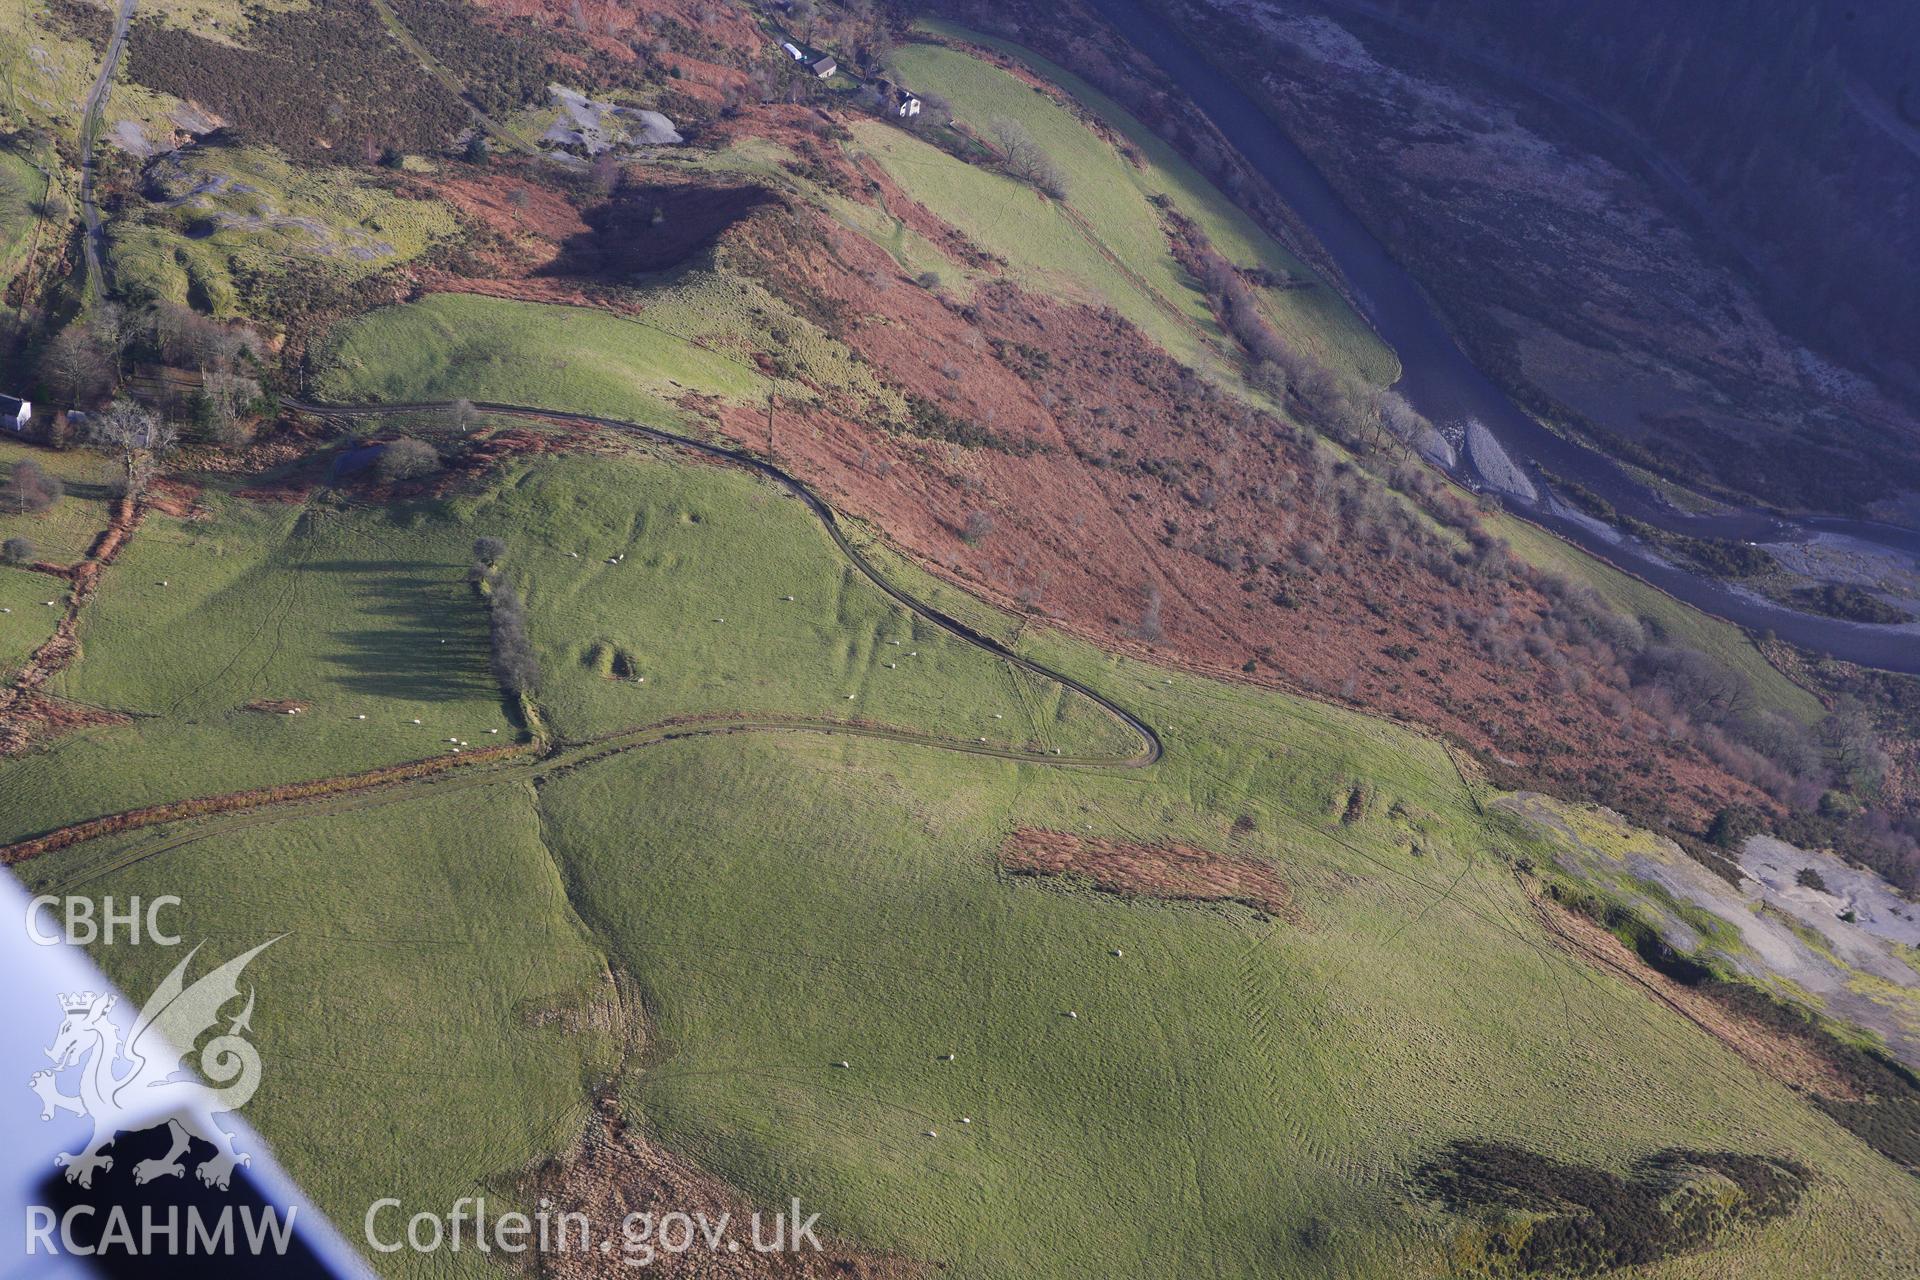 RCAHMW colour oblique photograph of Grogwynion Lead Mine, upper trials. Taken by Toby Driver on 07/02/2012.